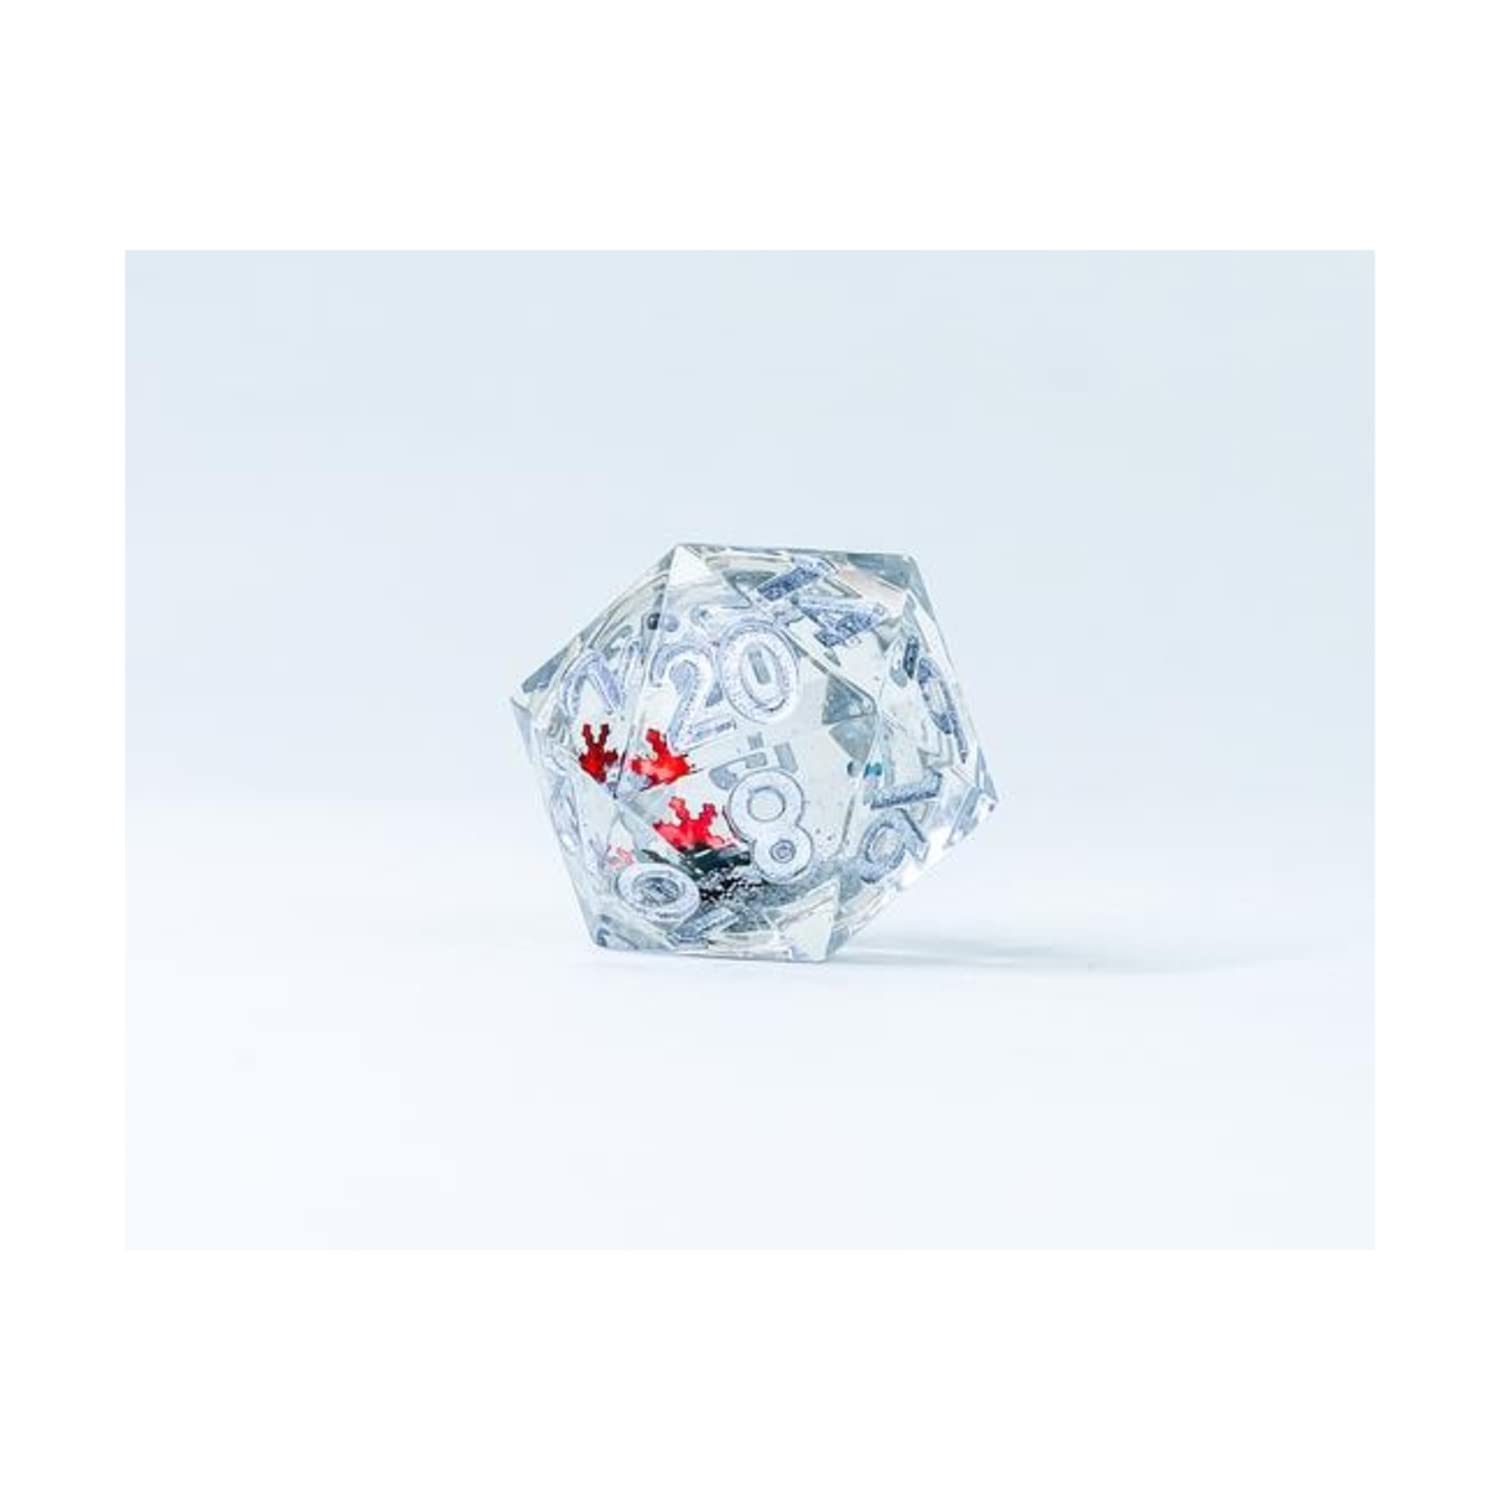 Sirius Dice Accessories 22mm Sharp Edged D20 - Silver Ink, Silver Glitter, Silver Green & Red Snowflakes